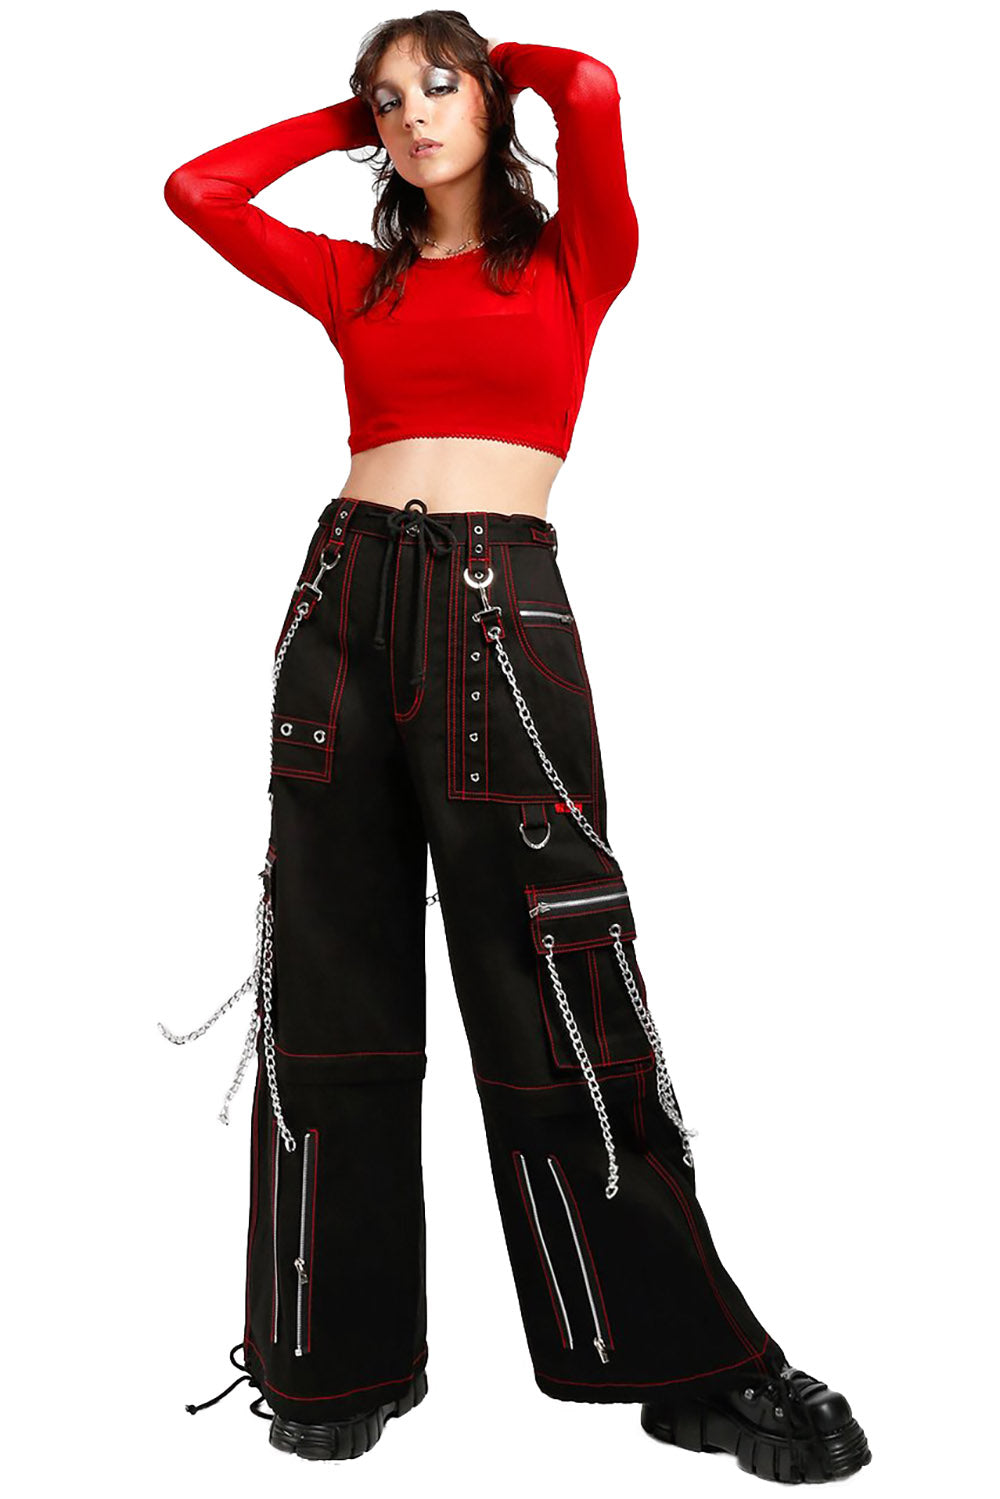 Forget Jncos. Remember Hot Topic Tripp chain pants? : r/Xennials